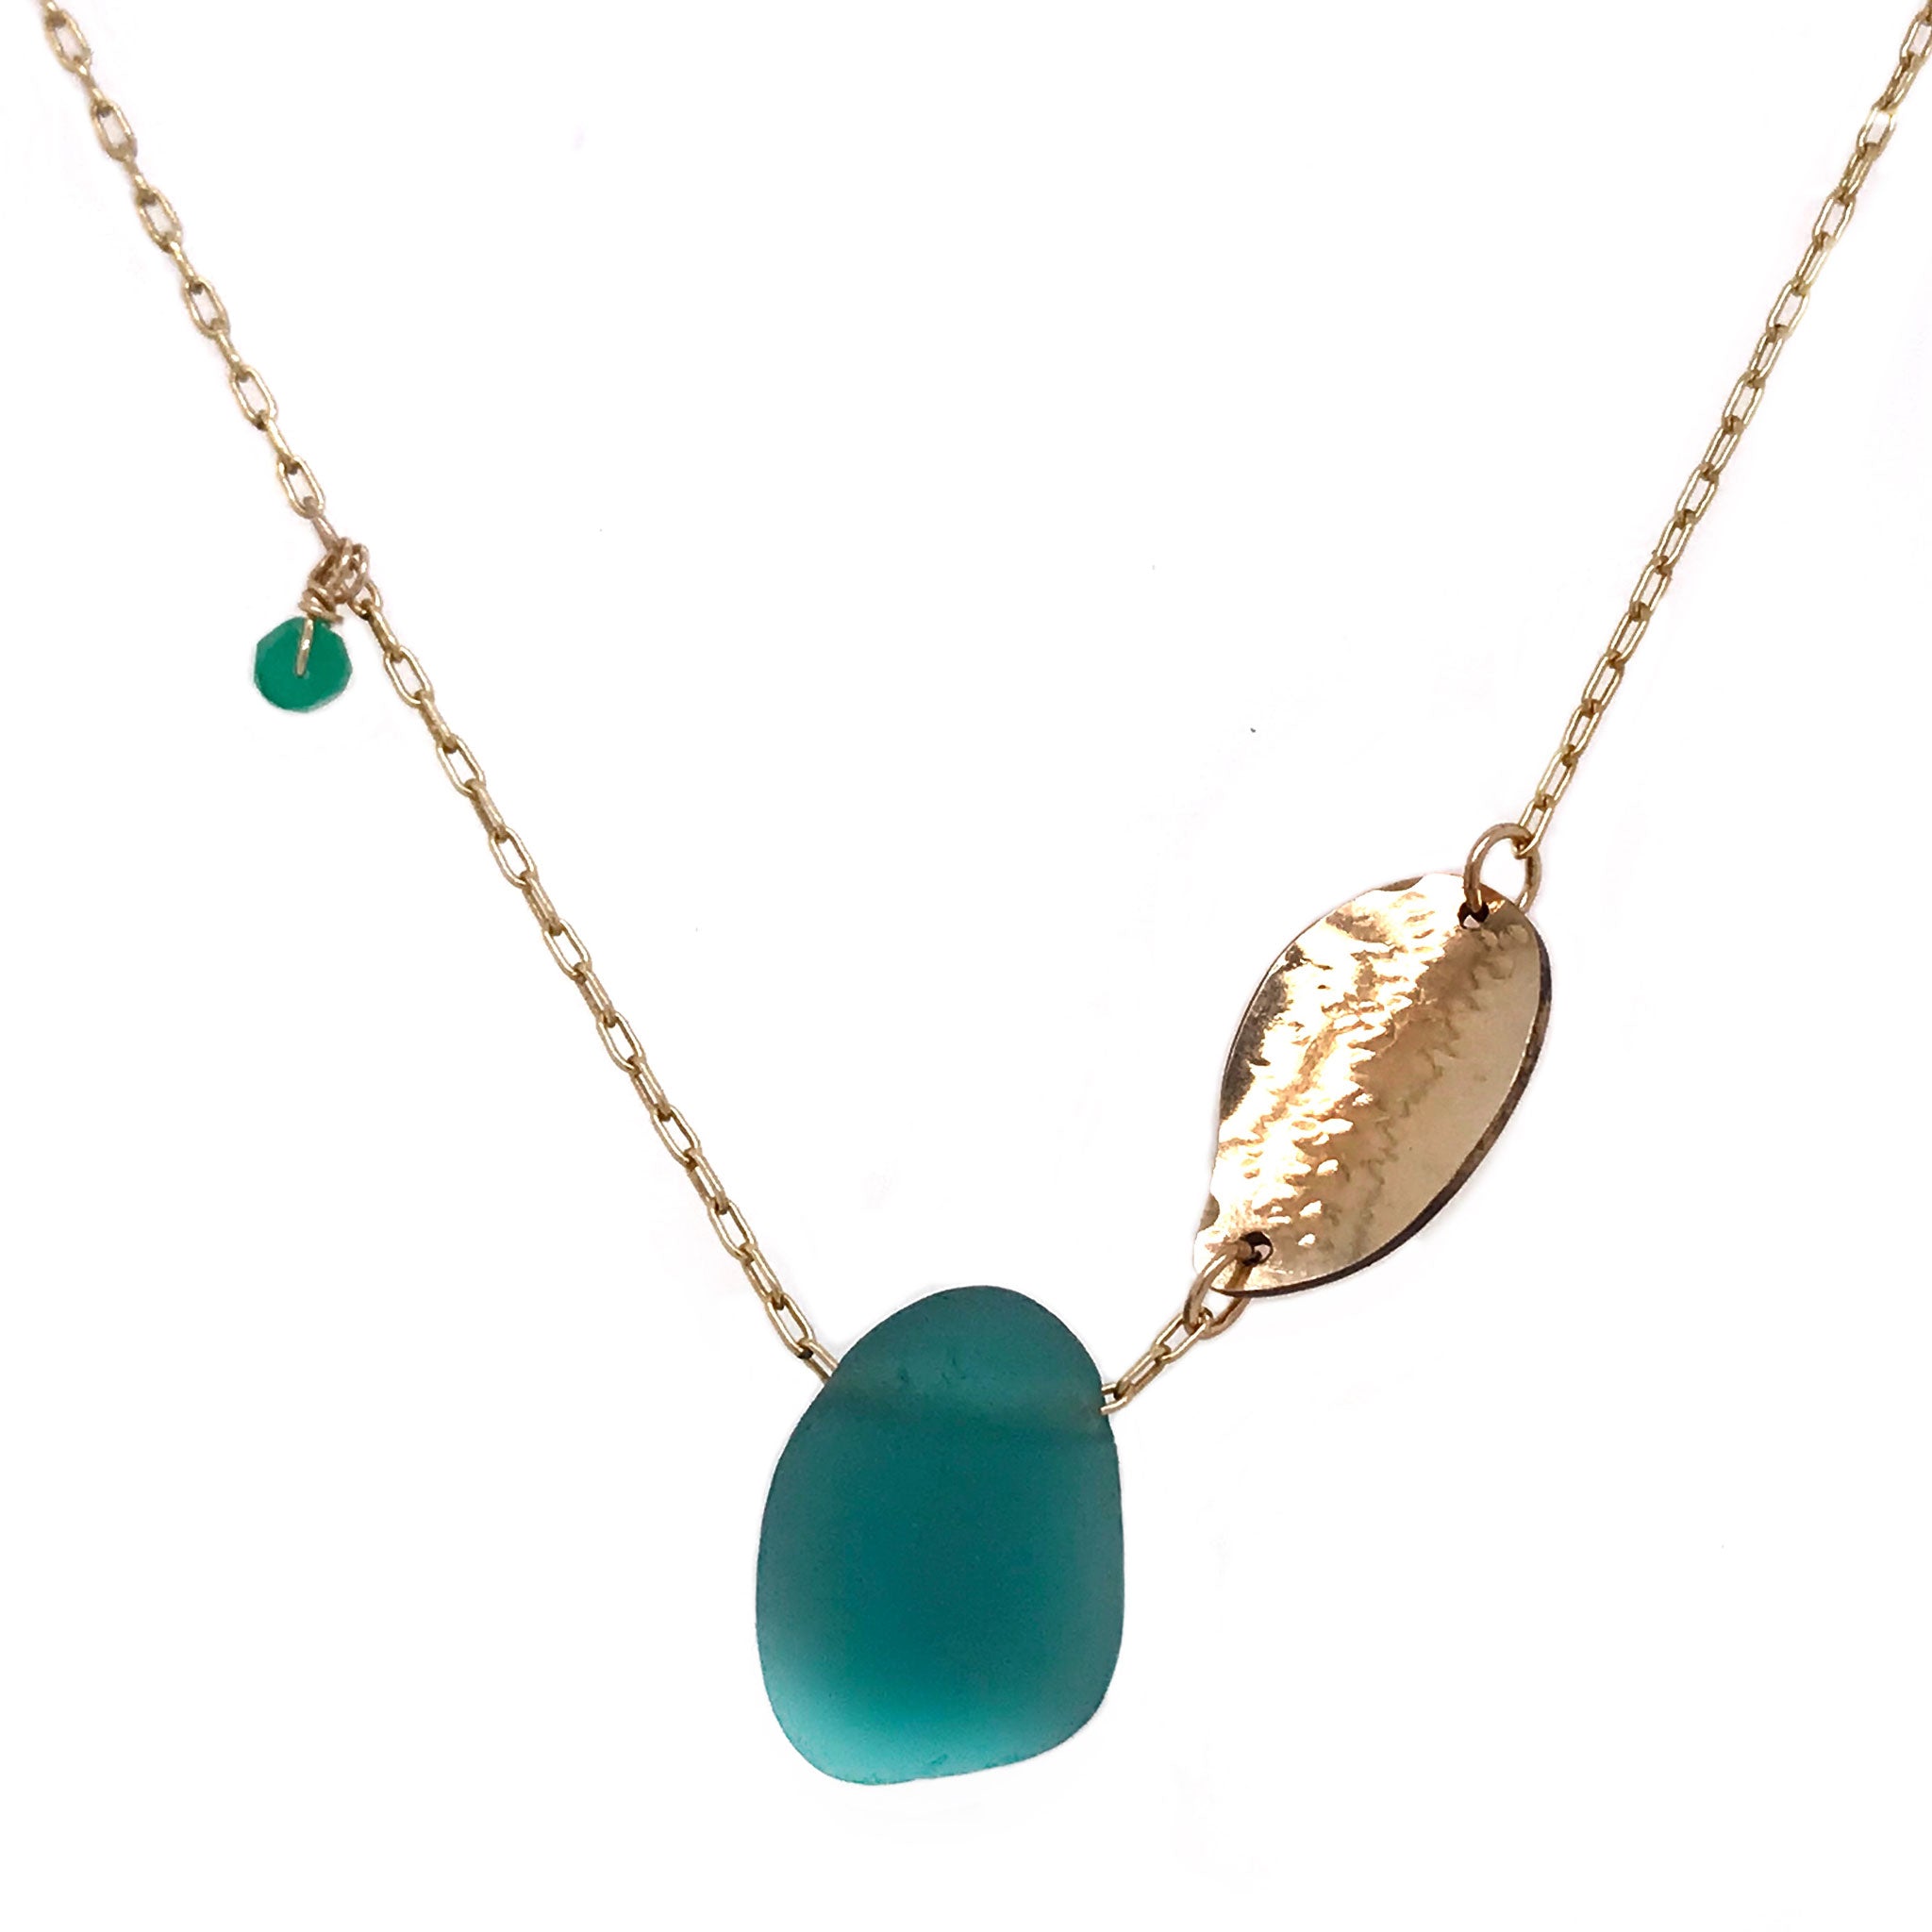 teal green seaglass necklace with gold leaf charm Kriket Broadhurst jewellery